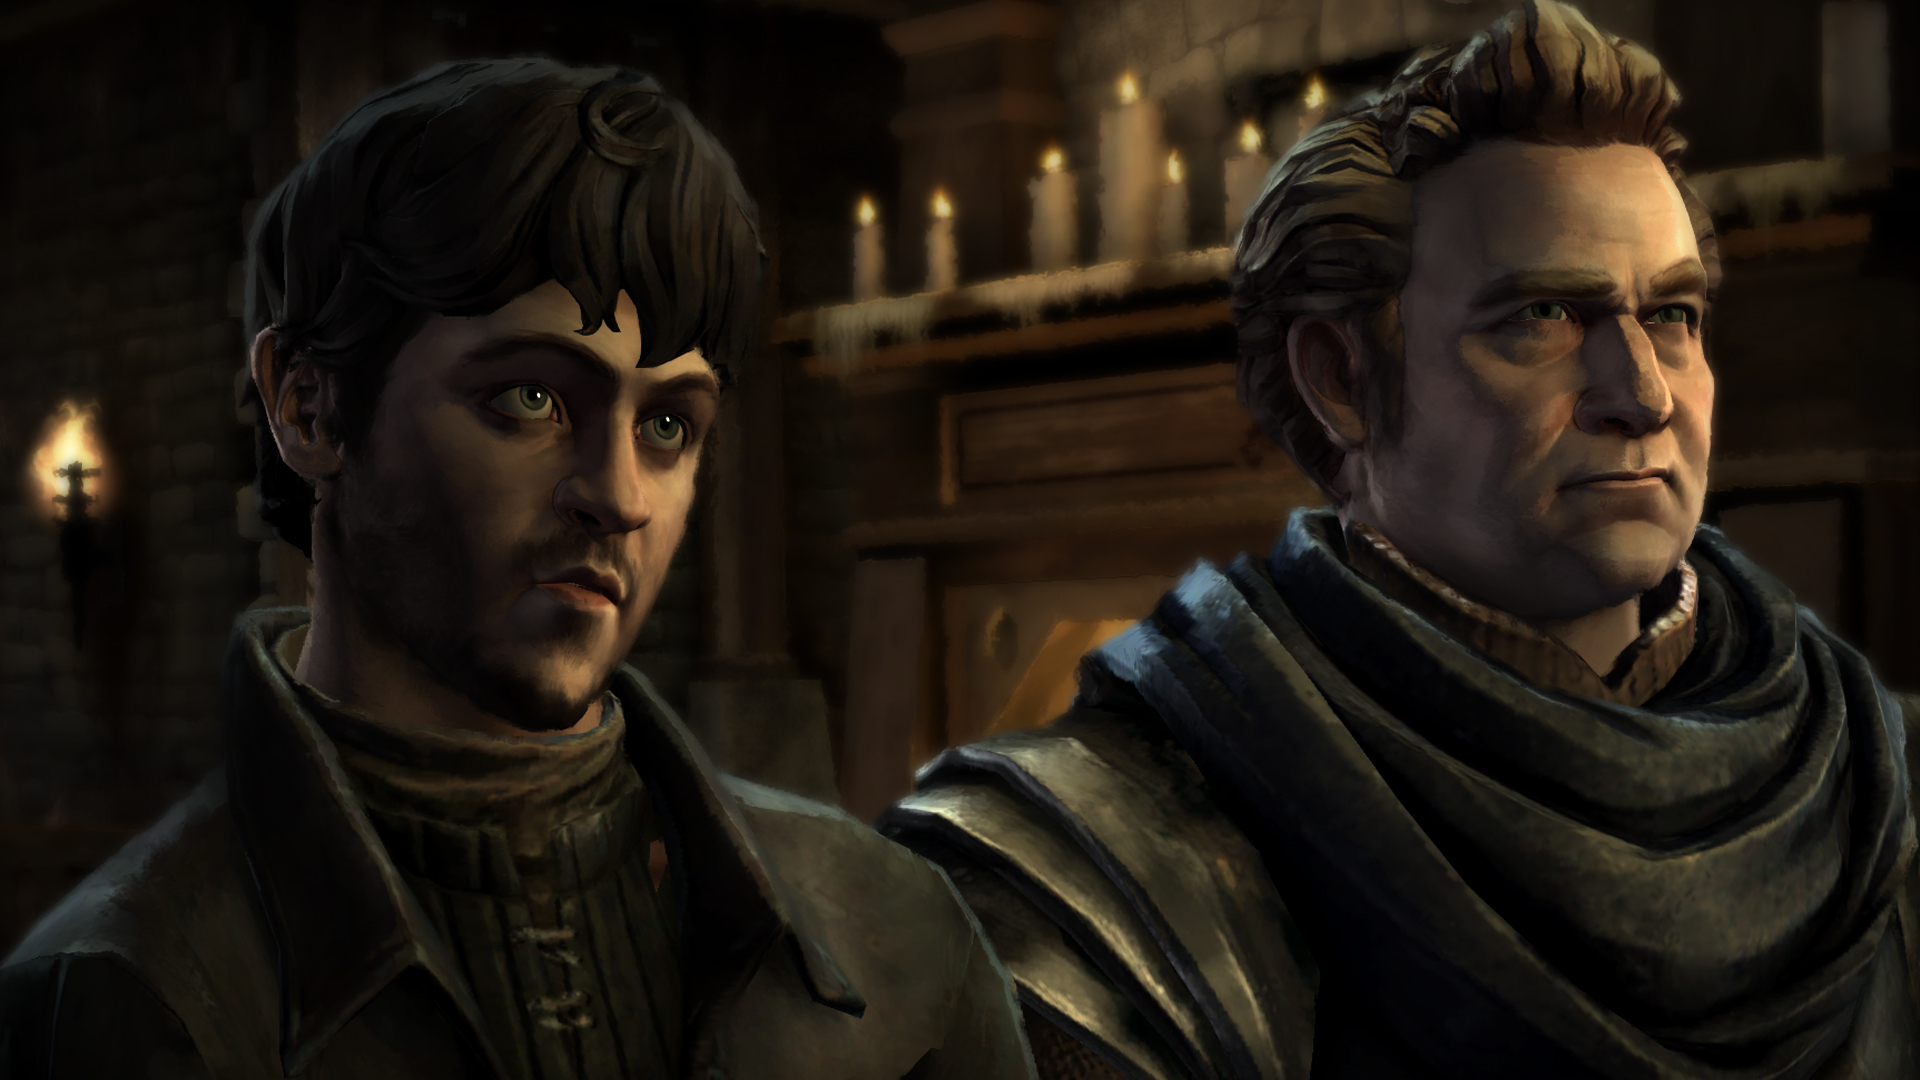 Game Of Thrones - A Telltale Games Series #17